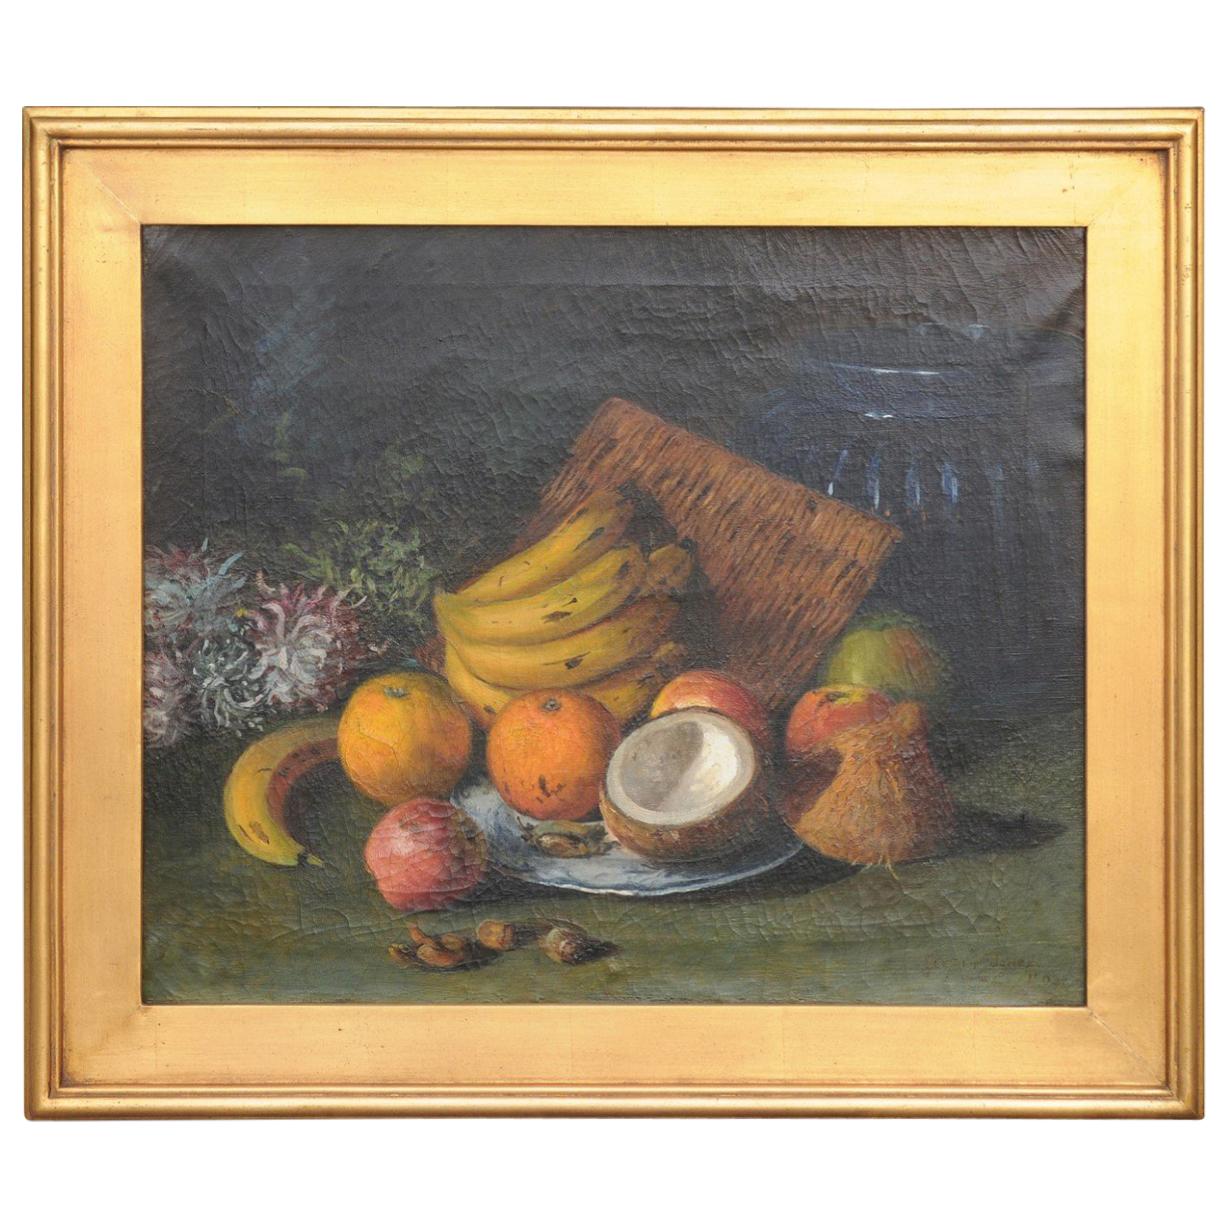 English 1908 Oil on Canvas Still-Life Painting Set Inside a Giltwood Frame